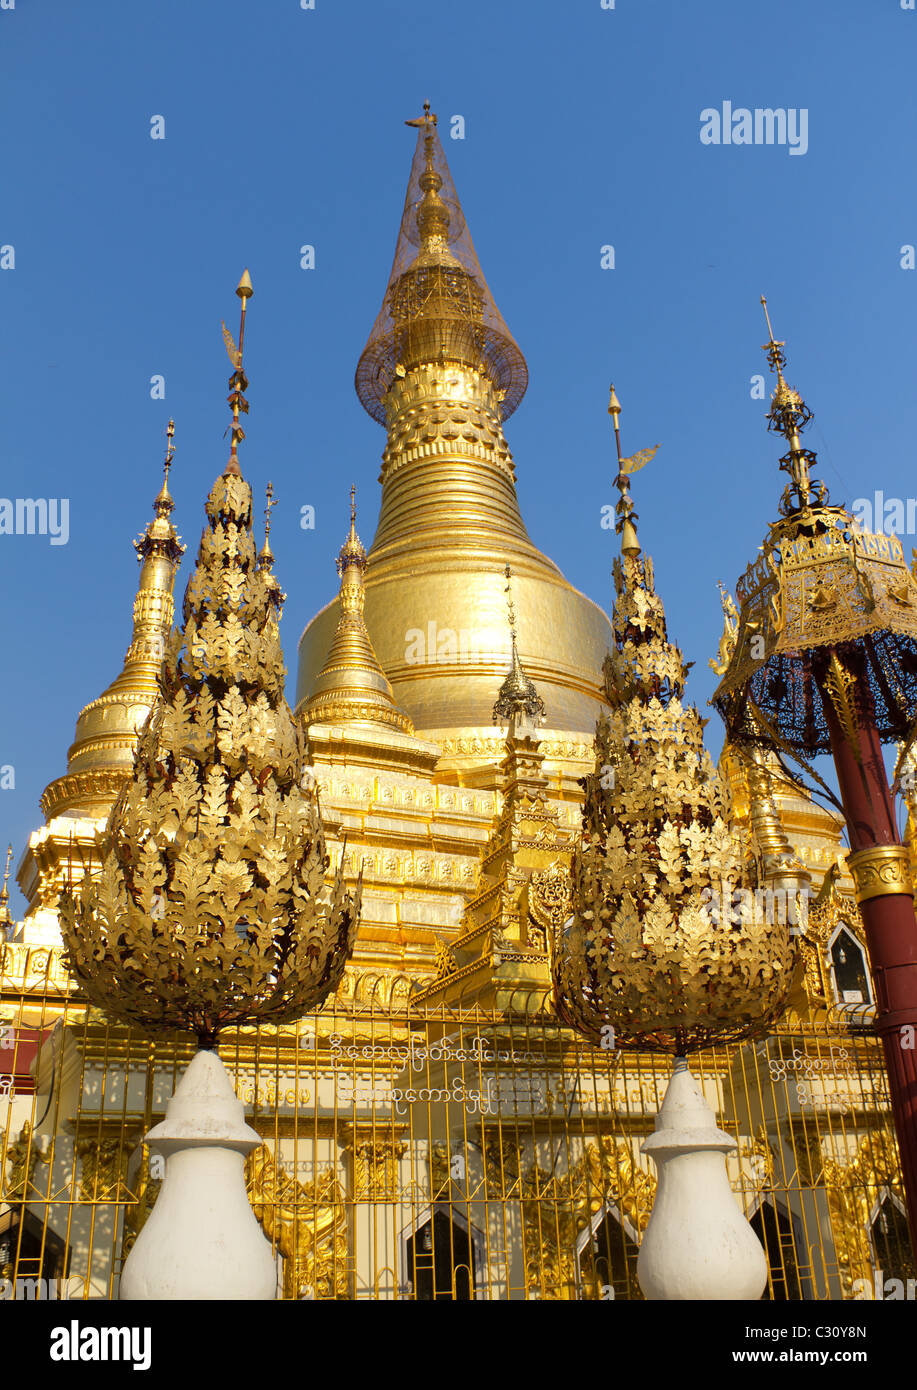 Golden Structures at the Buddhist Burmese Temple of Shwesandaw Paya in Pyay, Myanmar Stock Photo